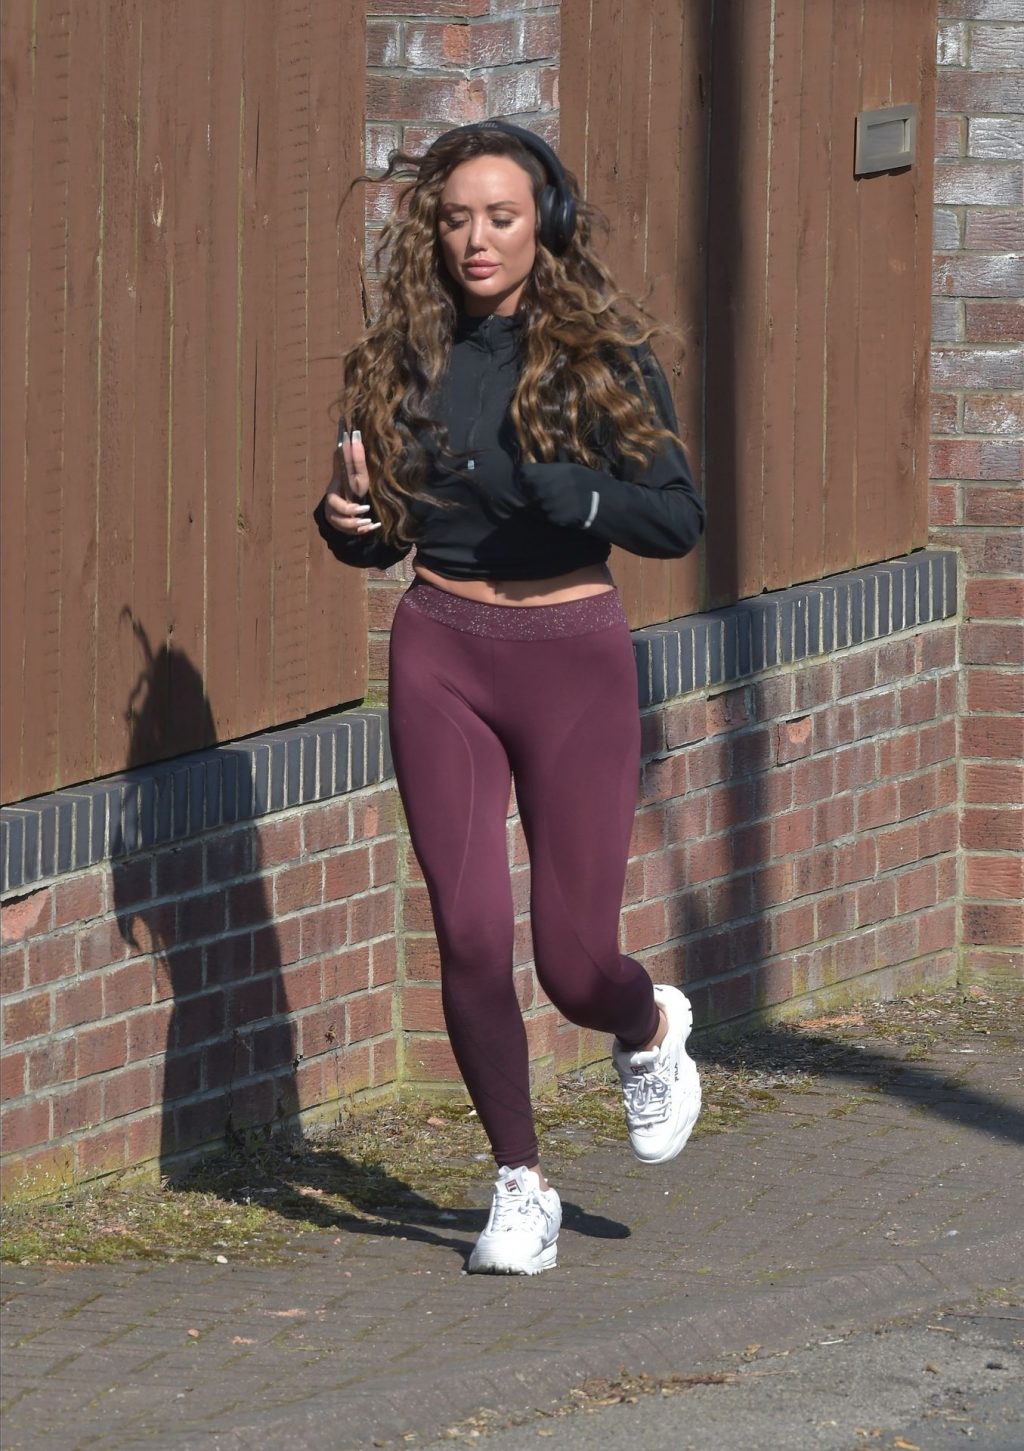 Charlotte Crosby Pictured While Jogging (43 Photos)